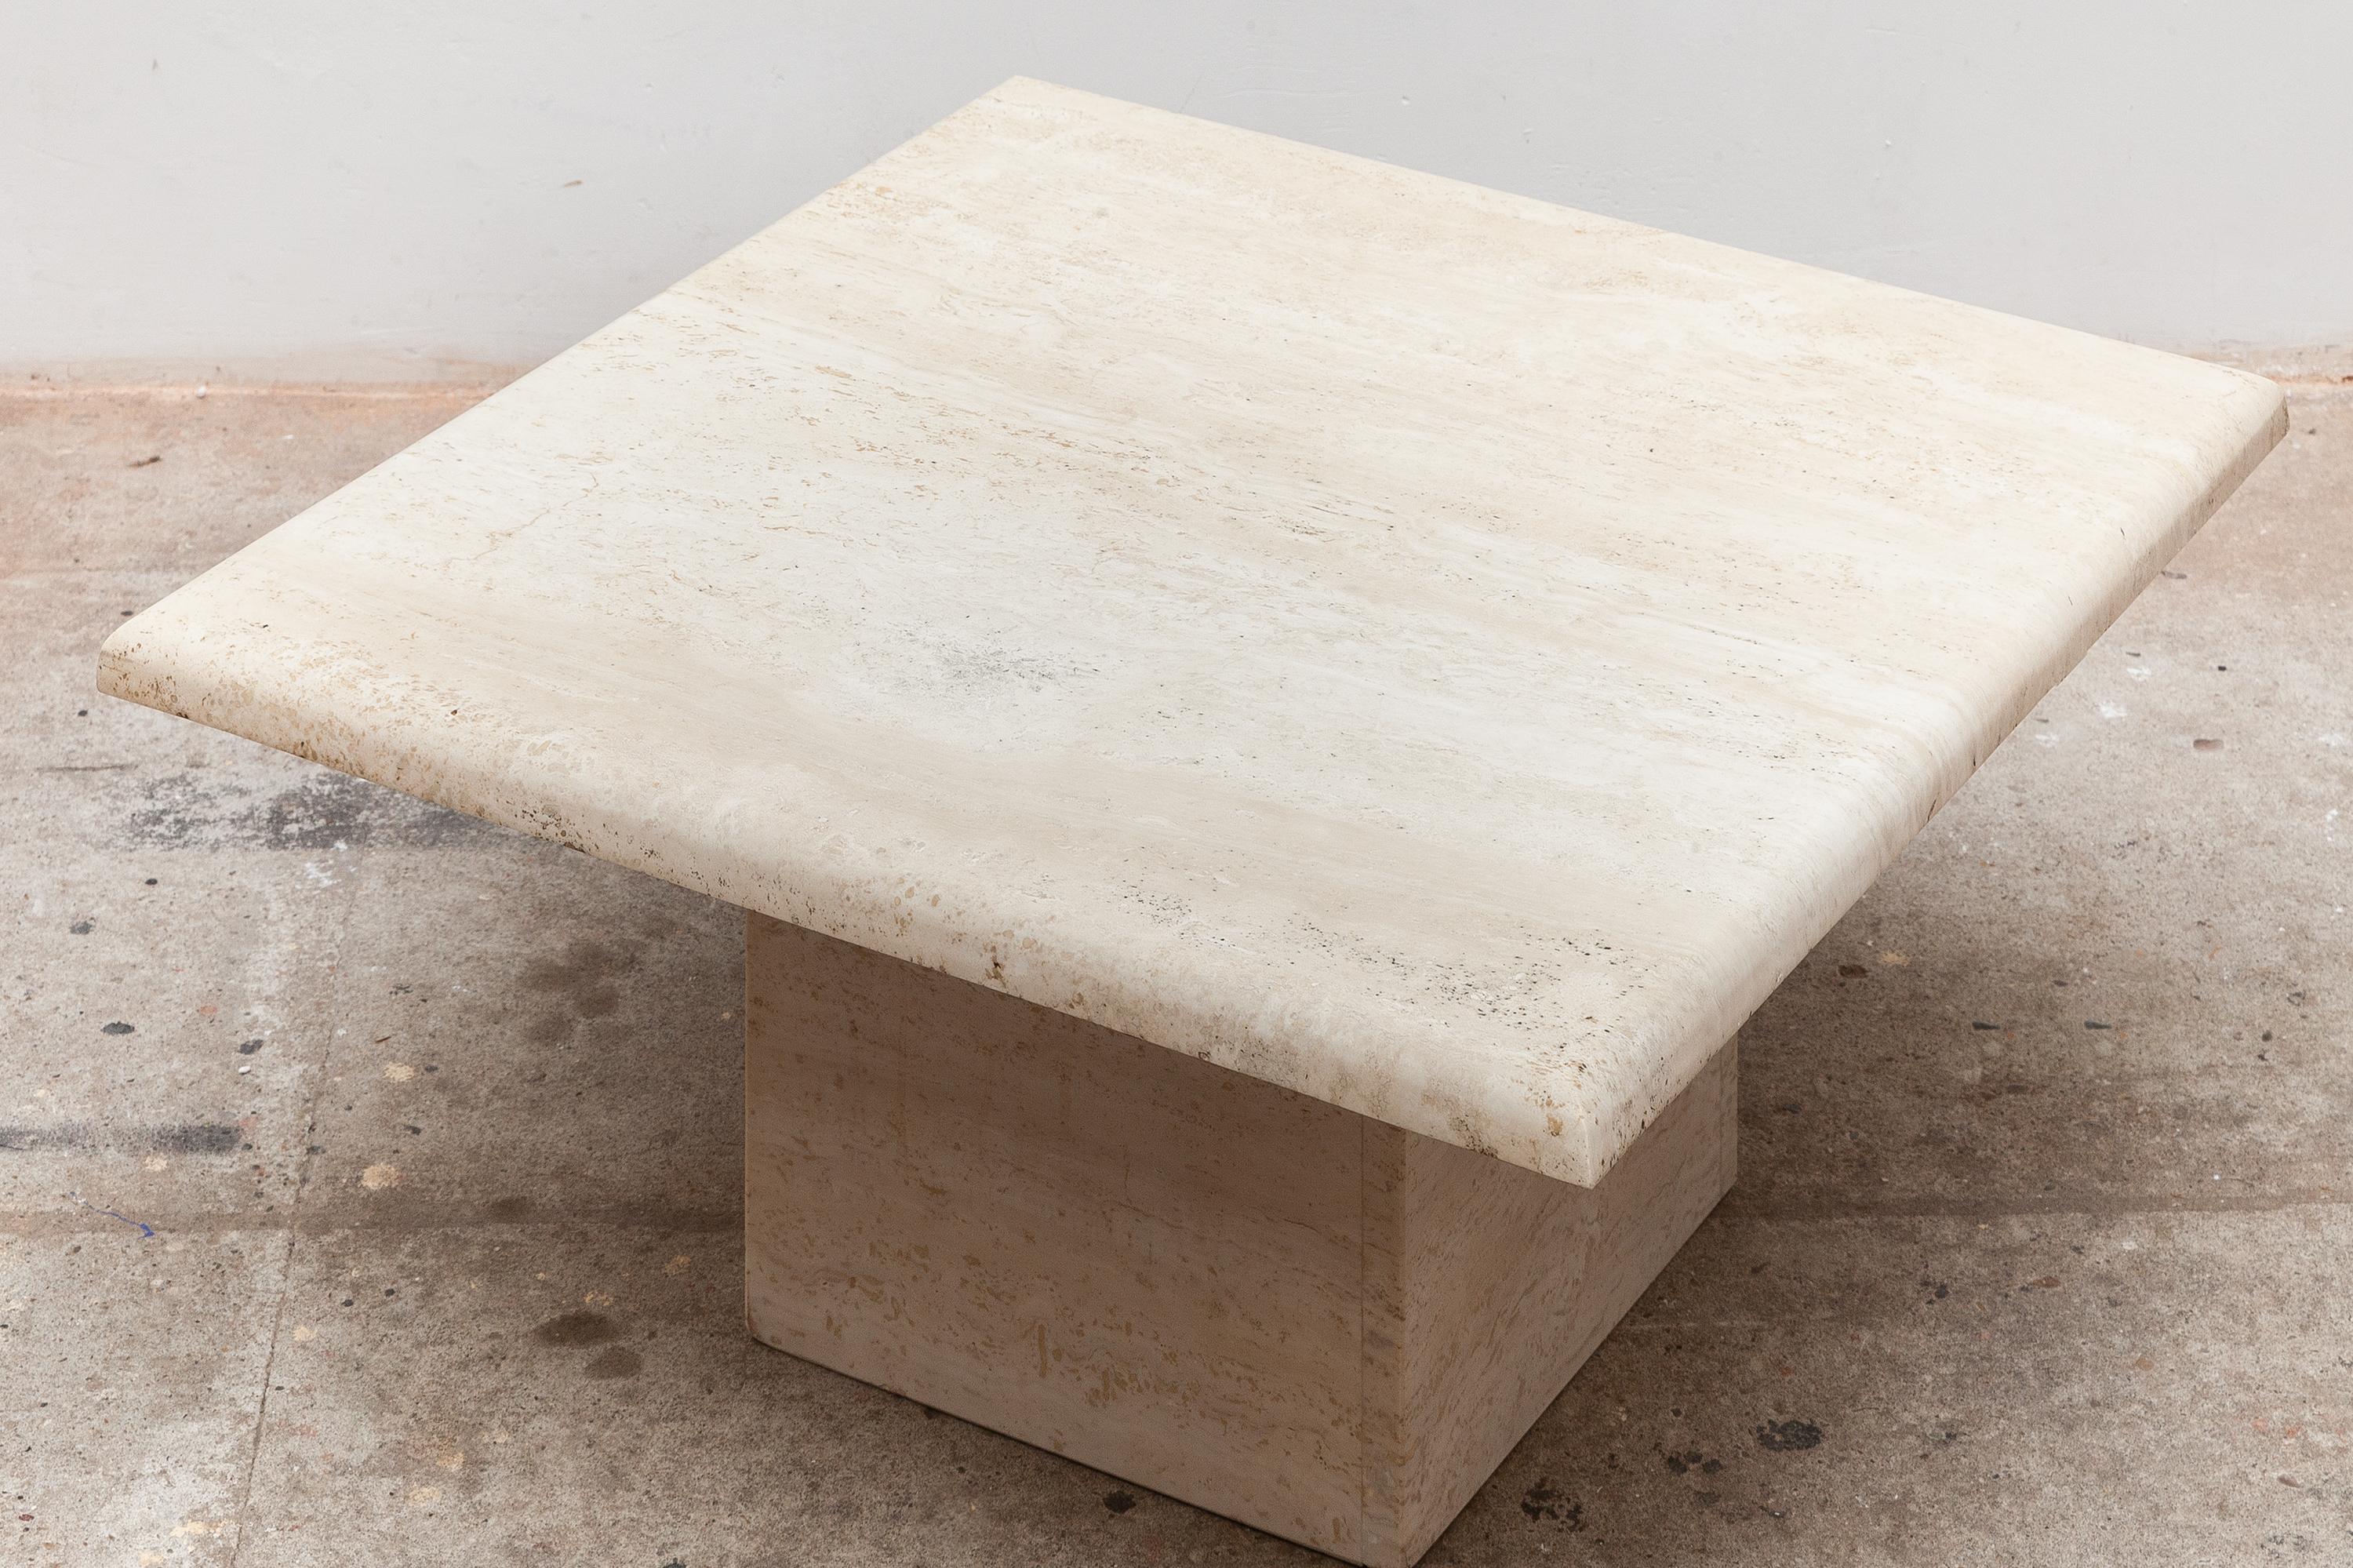 1970s travertine coffee table. Warm beige color stone. Square top with rounded edge and square base. Dimensions: 70 W x 33 H x 70 D cm. Very good original condition.